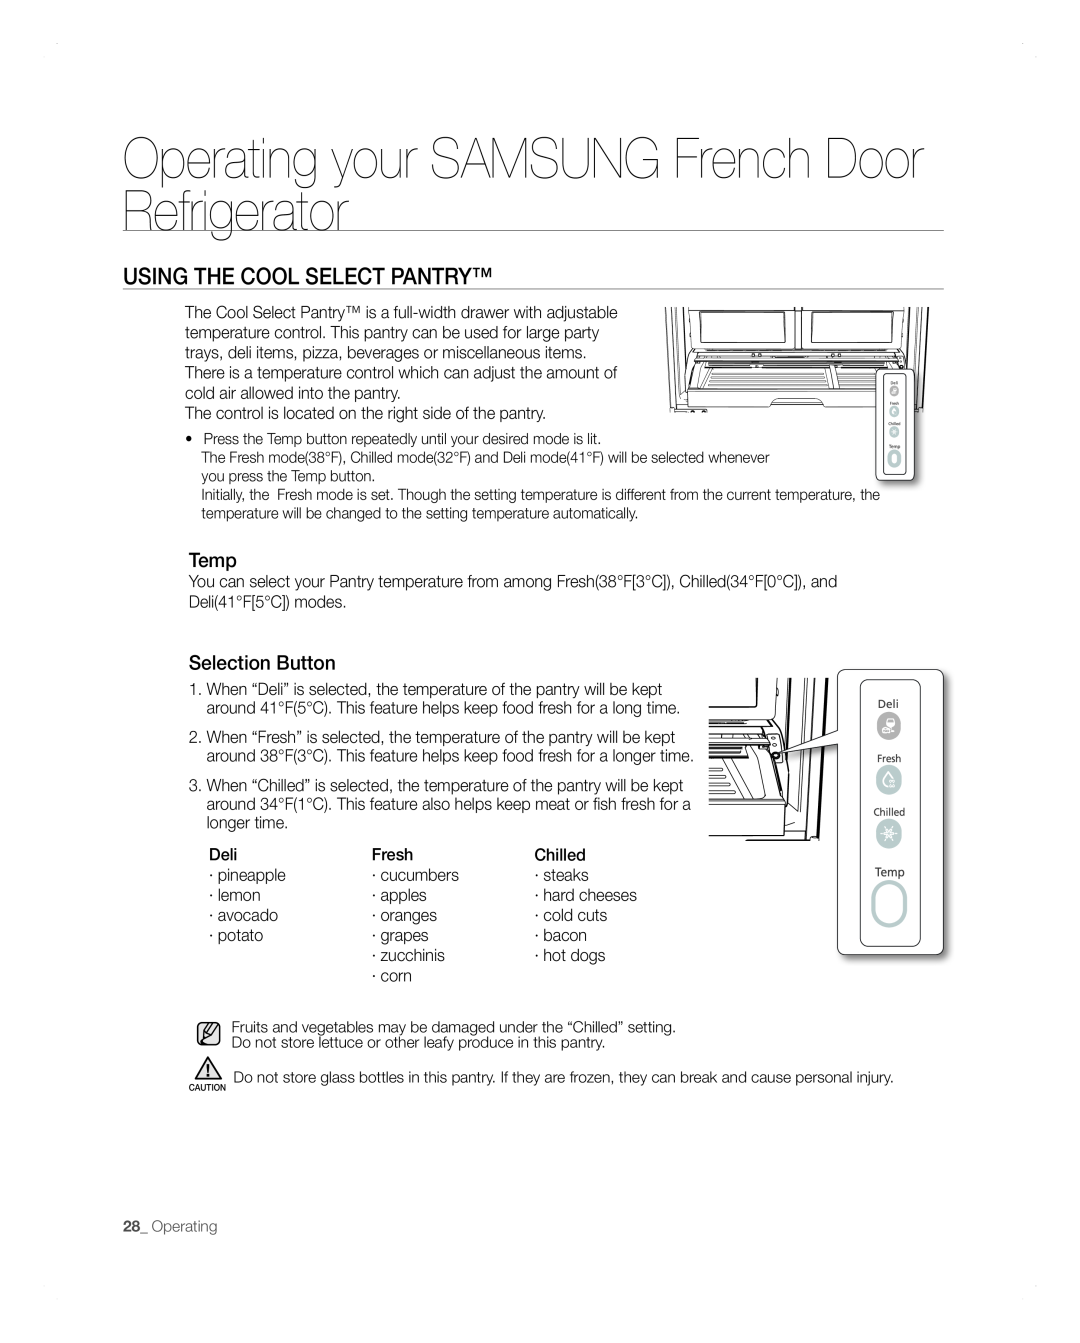 Samsung RFG297AARS Using The Cool Select Pantry, Operating your SAMSUNG French Door Refrigerator, Temp, Selection Button 